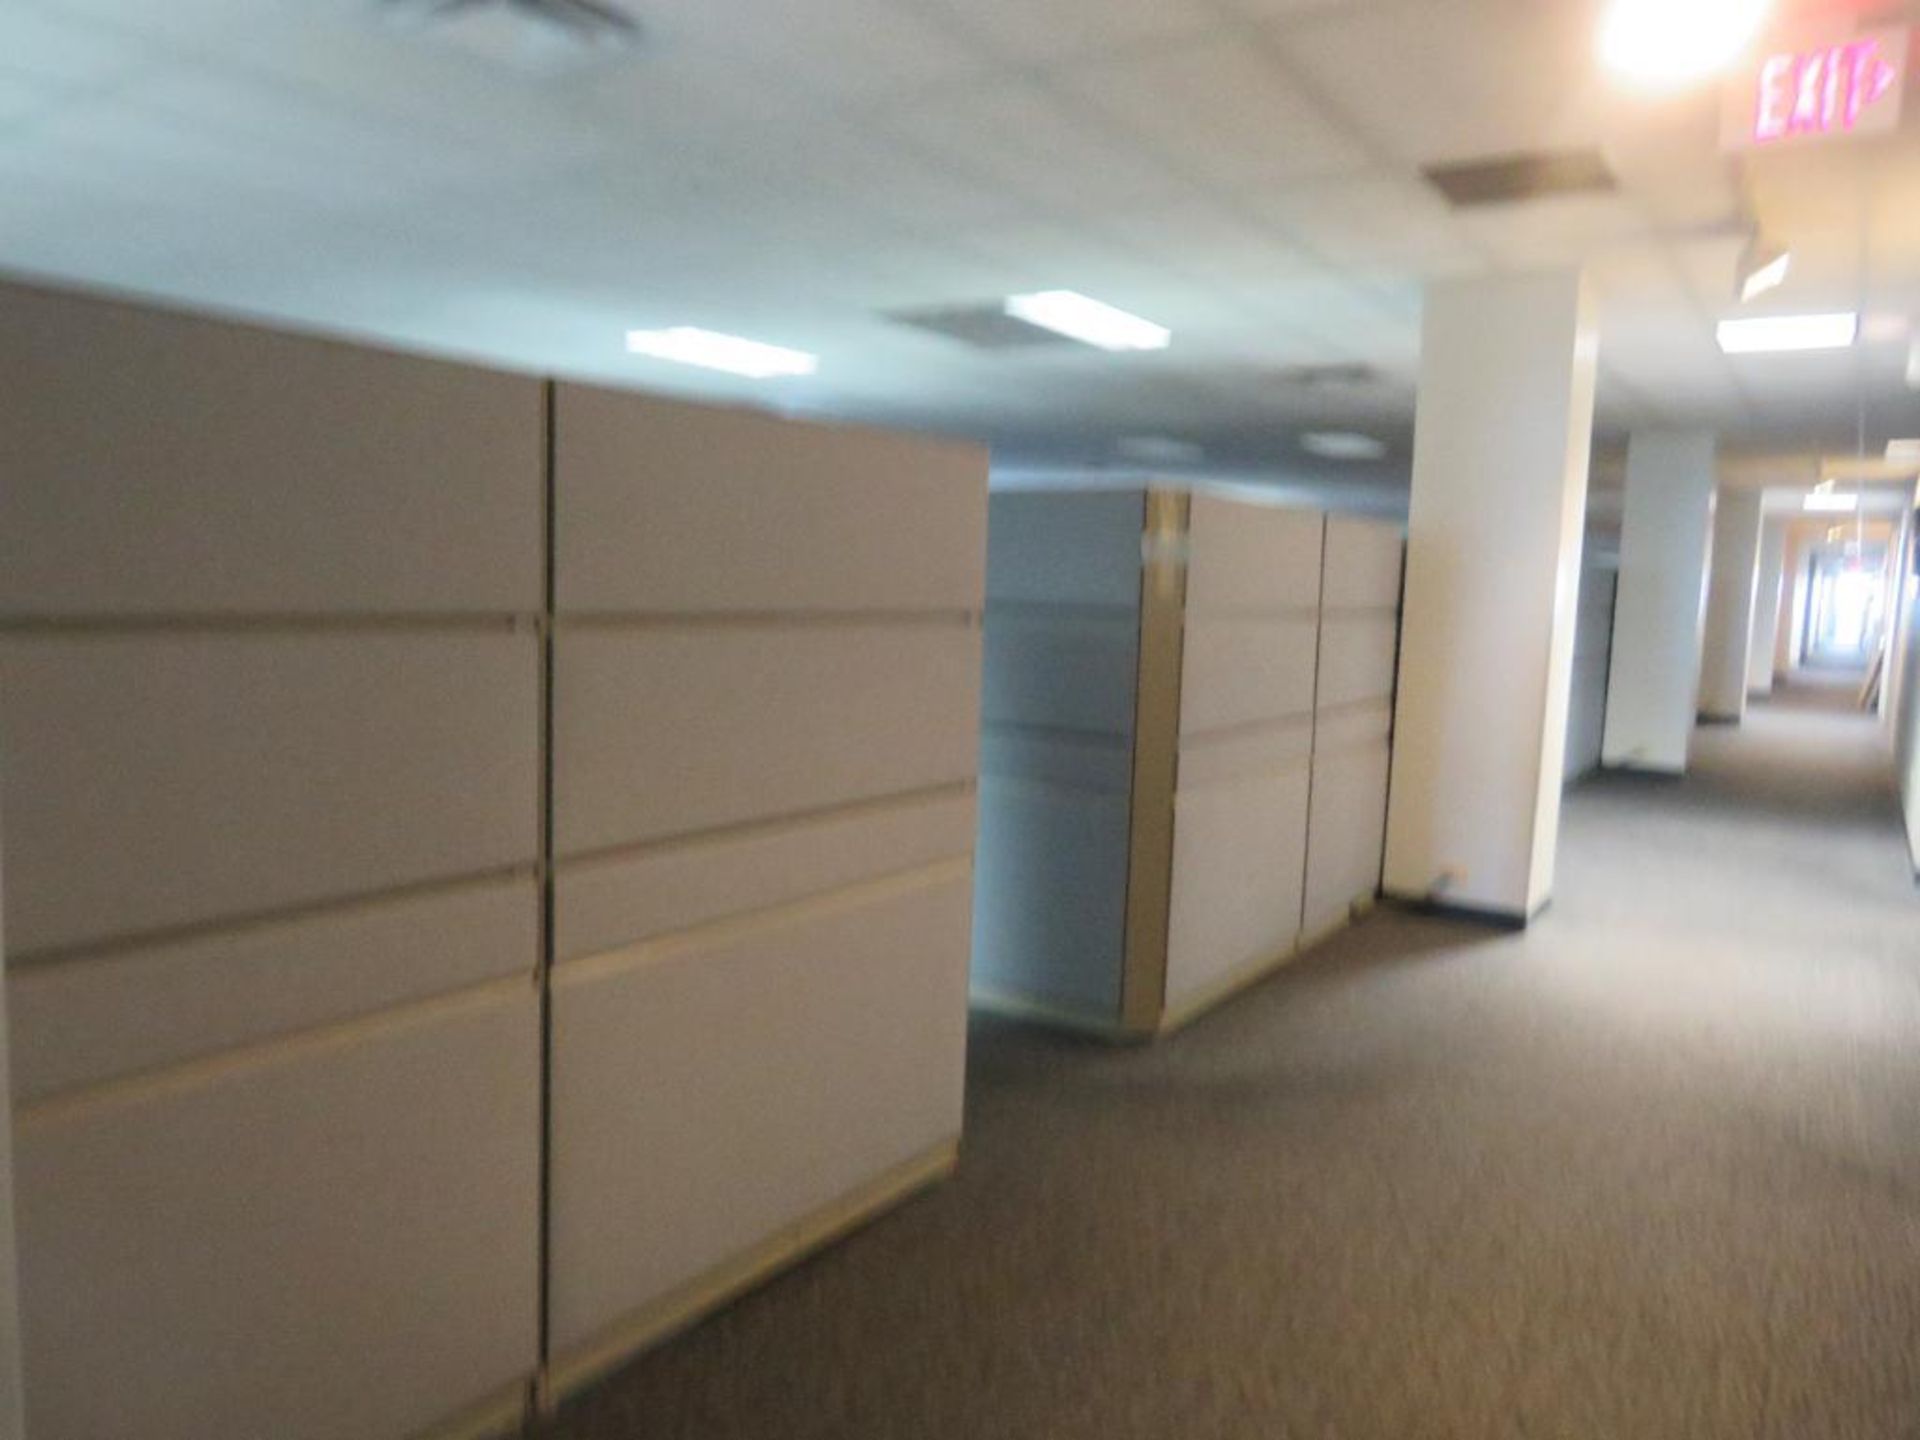 Lot c/o: Large Quantity of Cubicle Partitions Appx. 12,000-Sq. Ft. of 67" & 54" Tall - Image 4 of 6